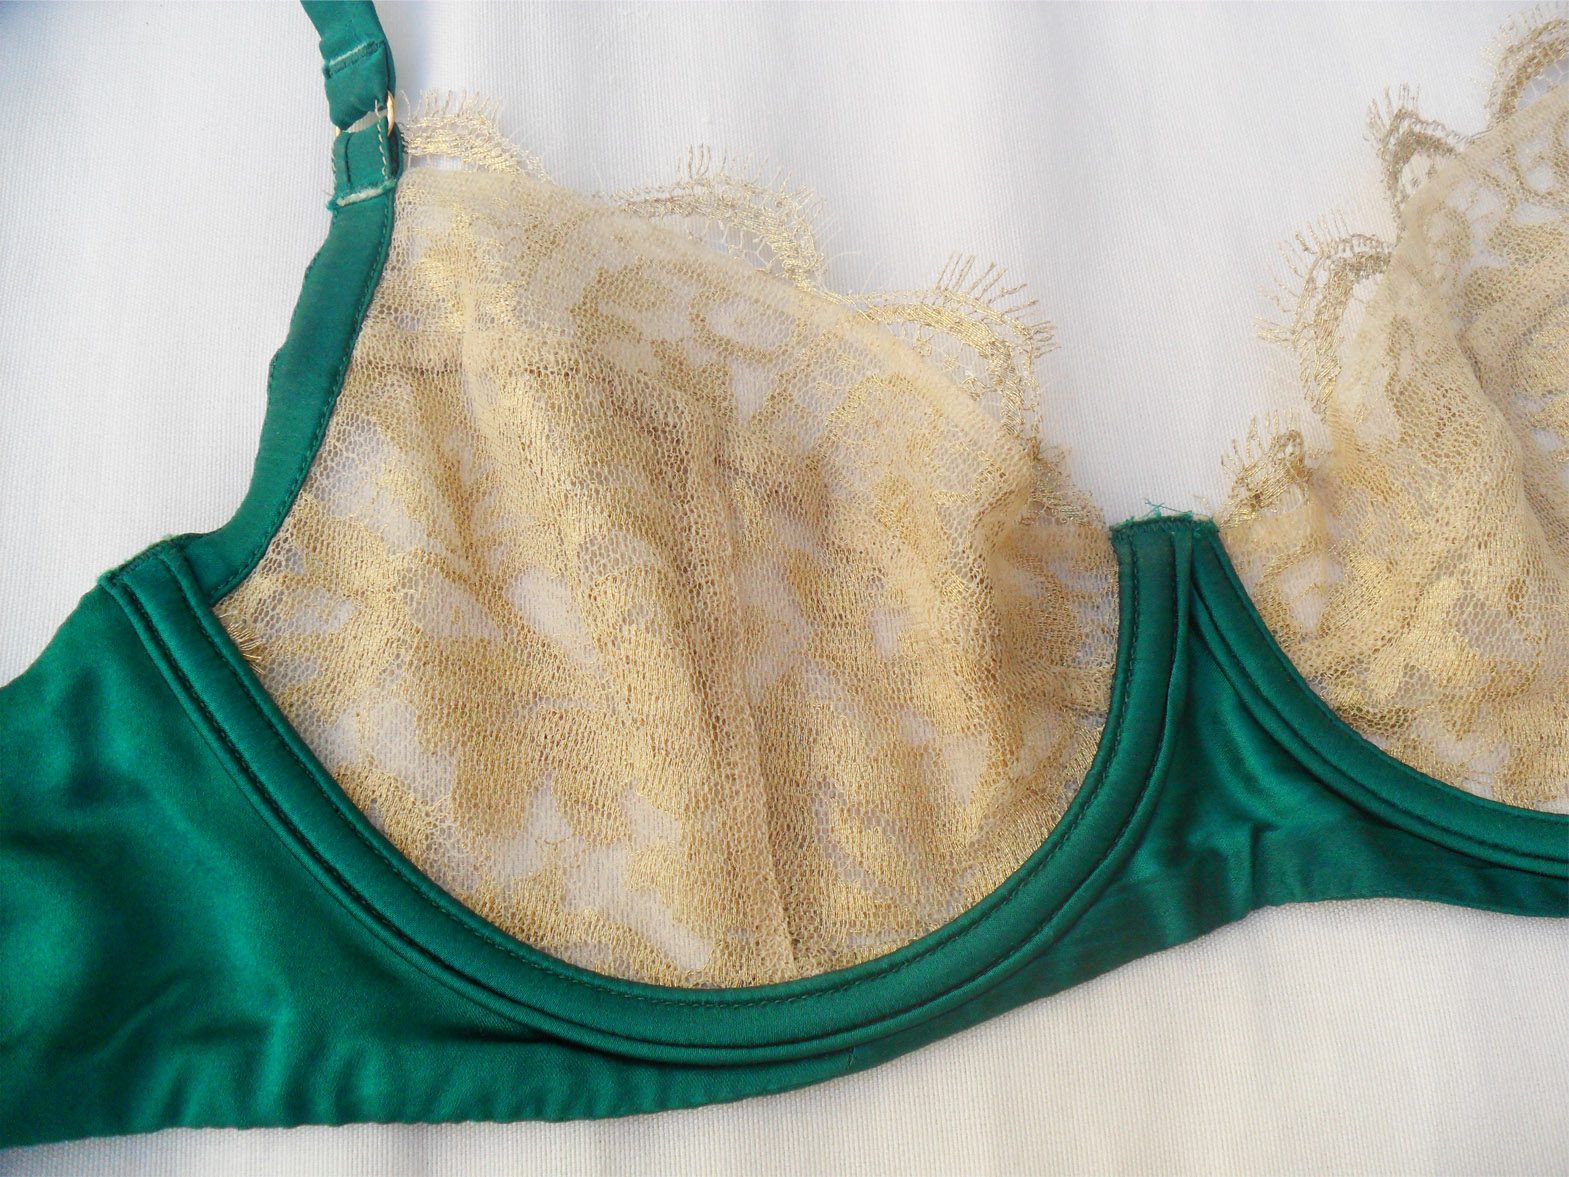 Lace bra review! ✨